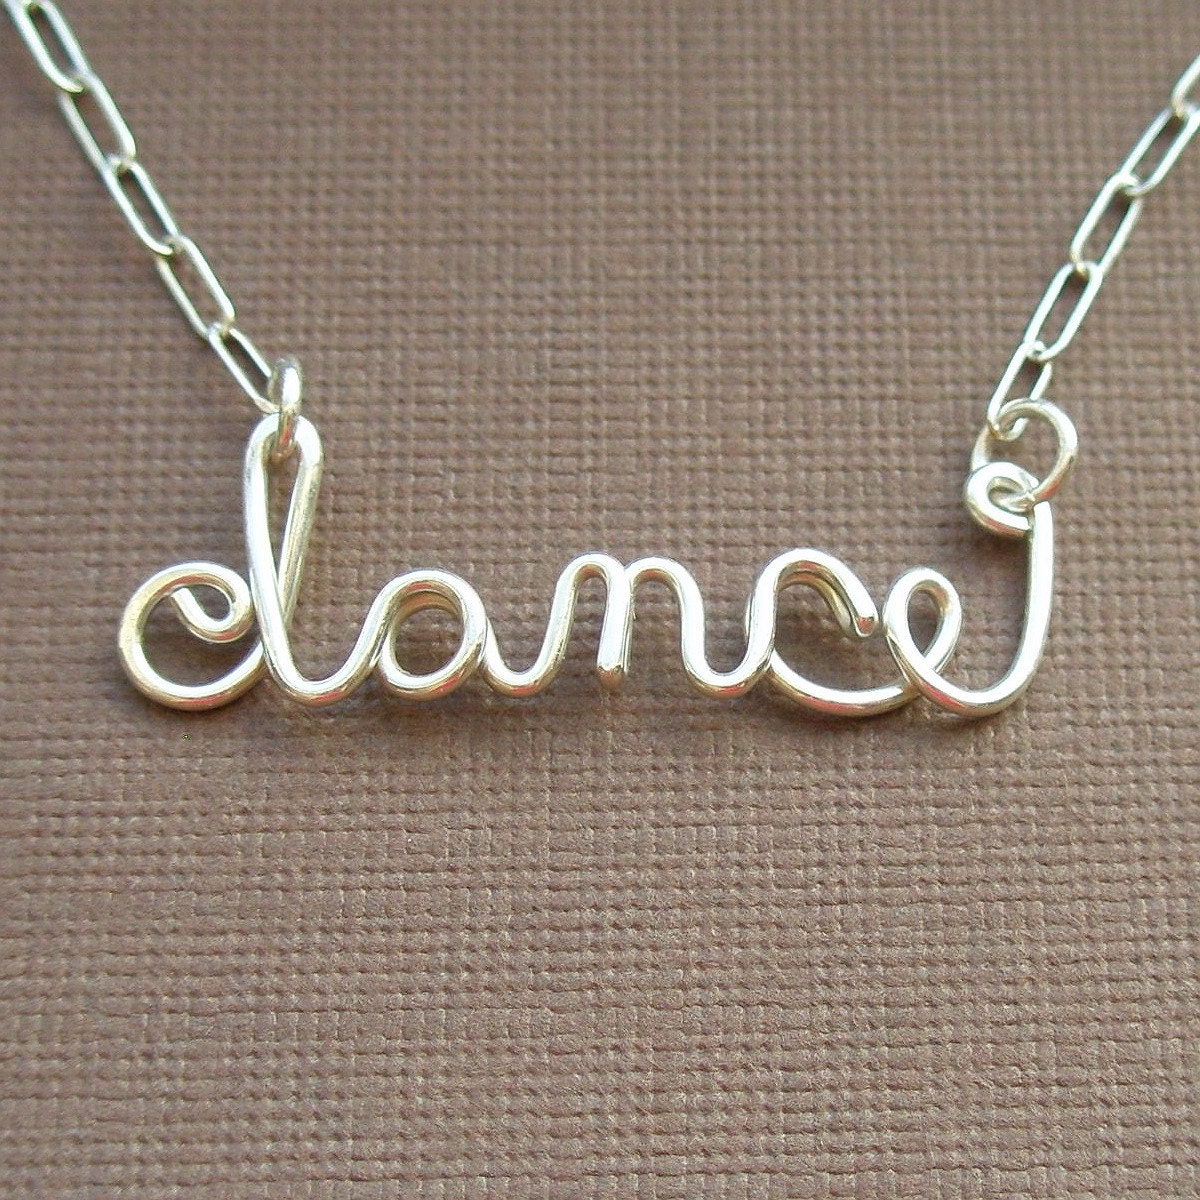 dance necklace - all sterling silver